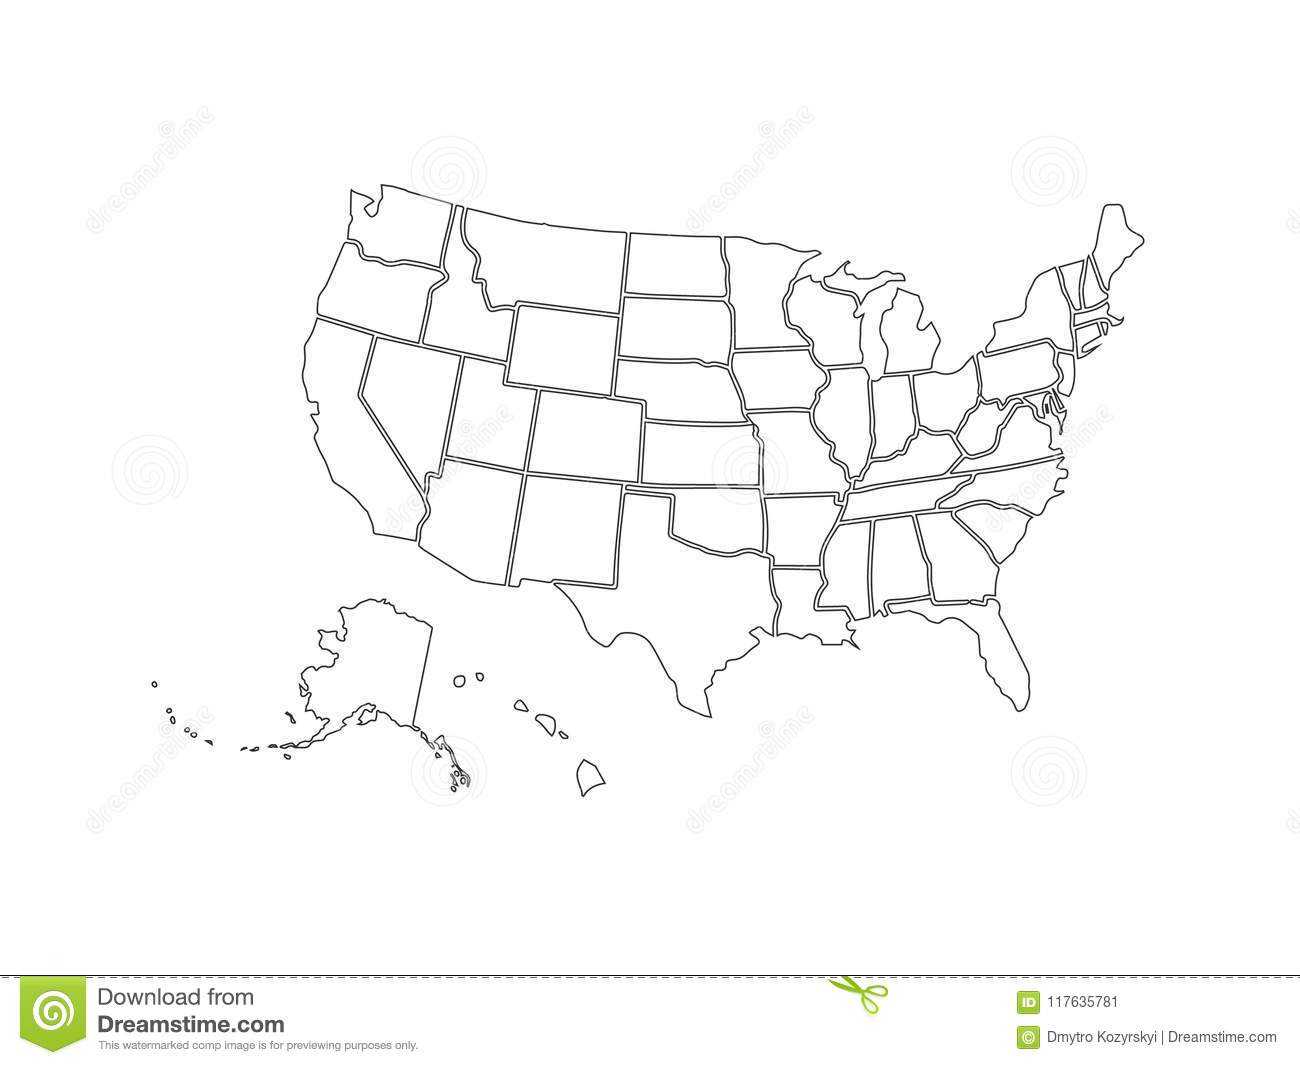 38E8A Blank Us Map Template | Wiring Library Throughout United States Map Template Blank